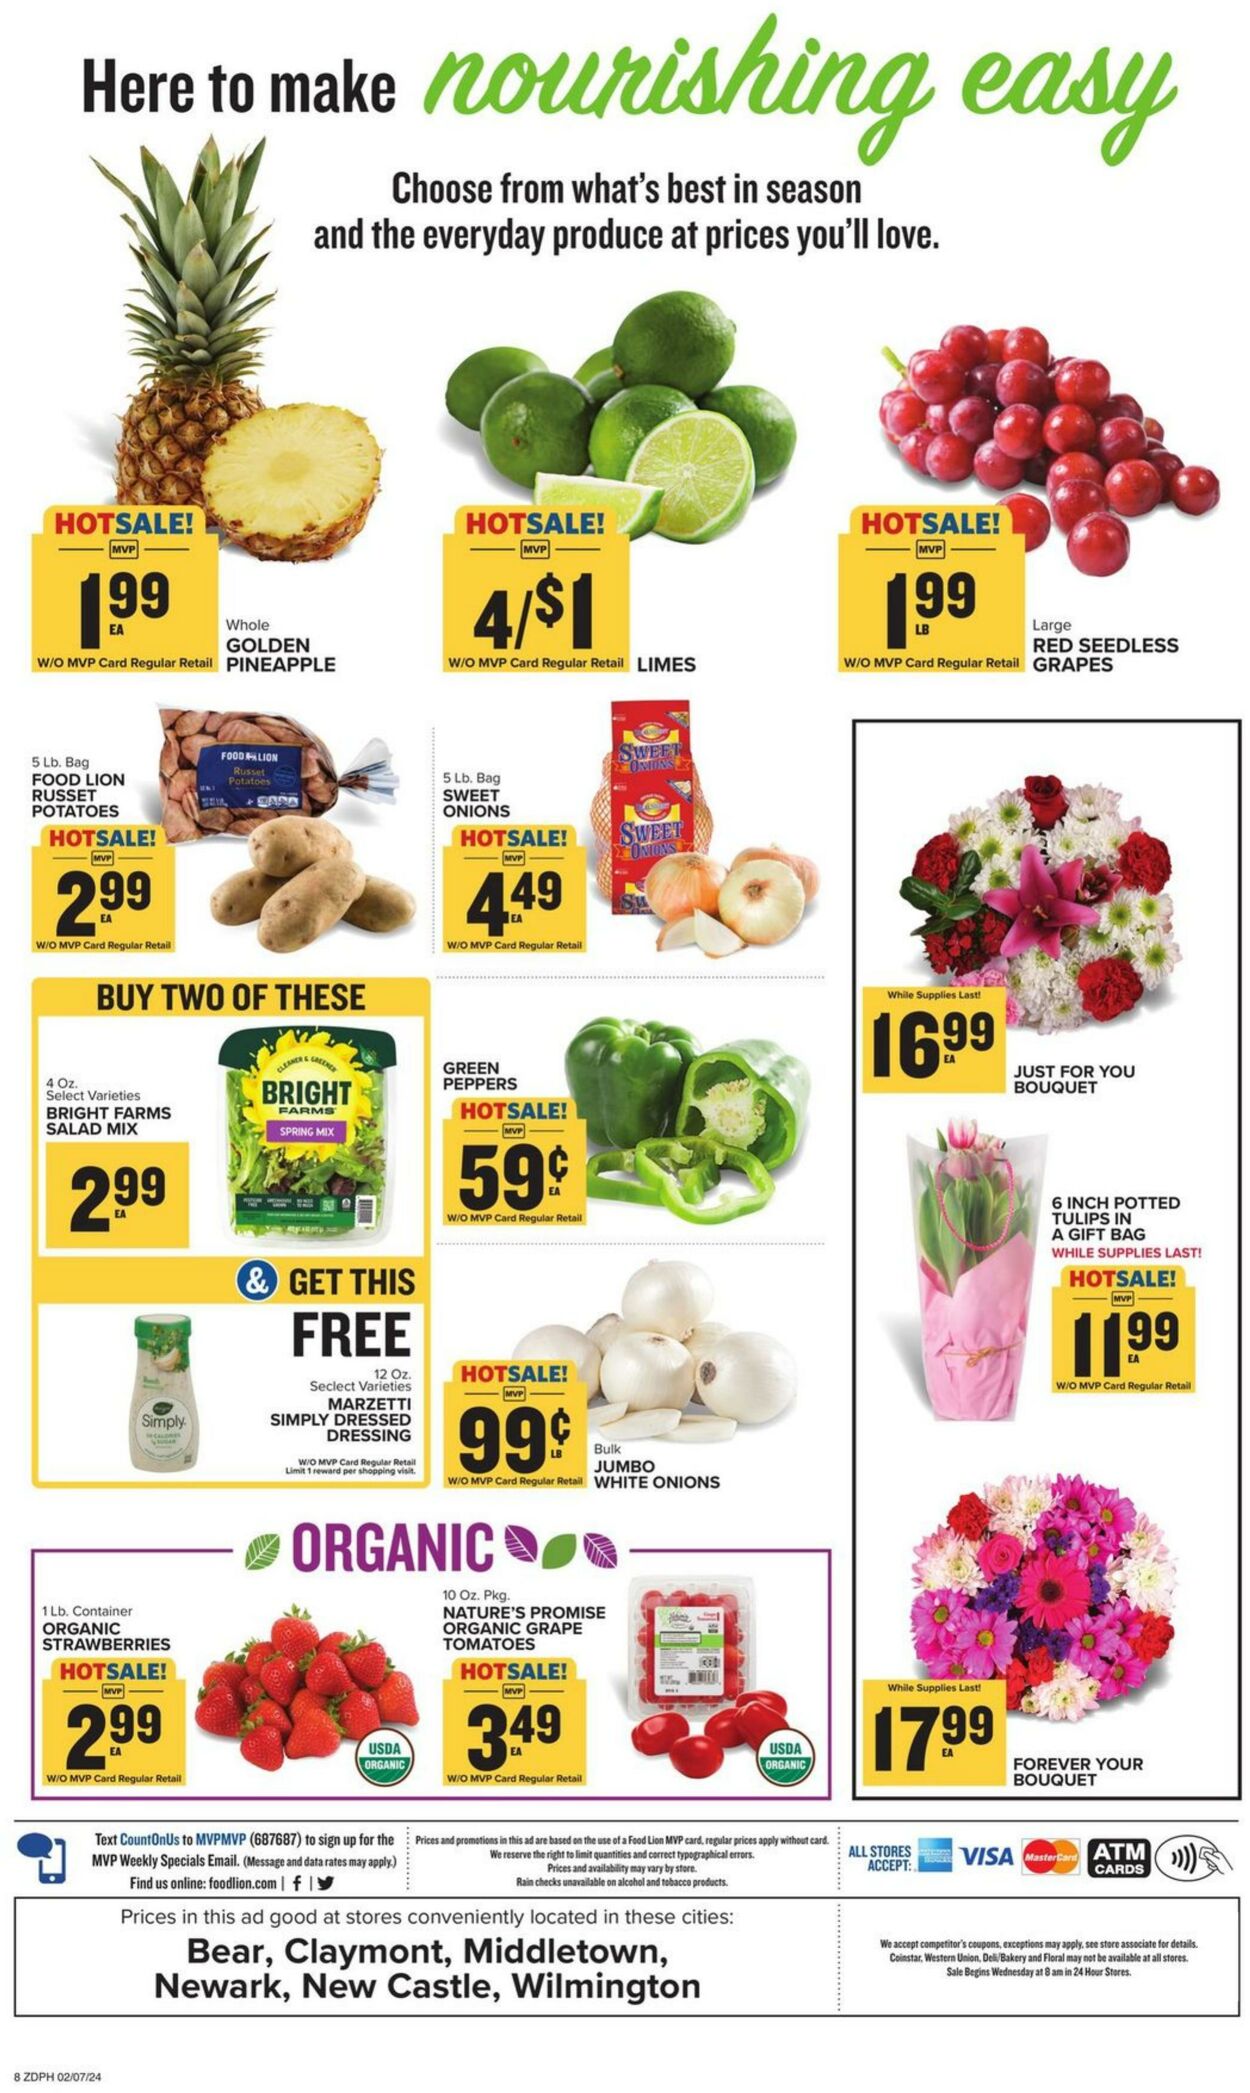 Catalogue Food Lion from 02/07/2024